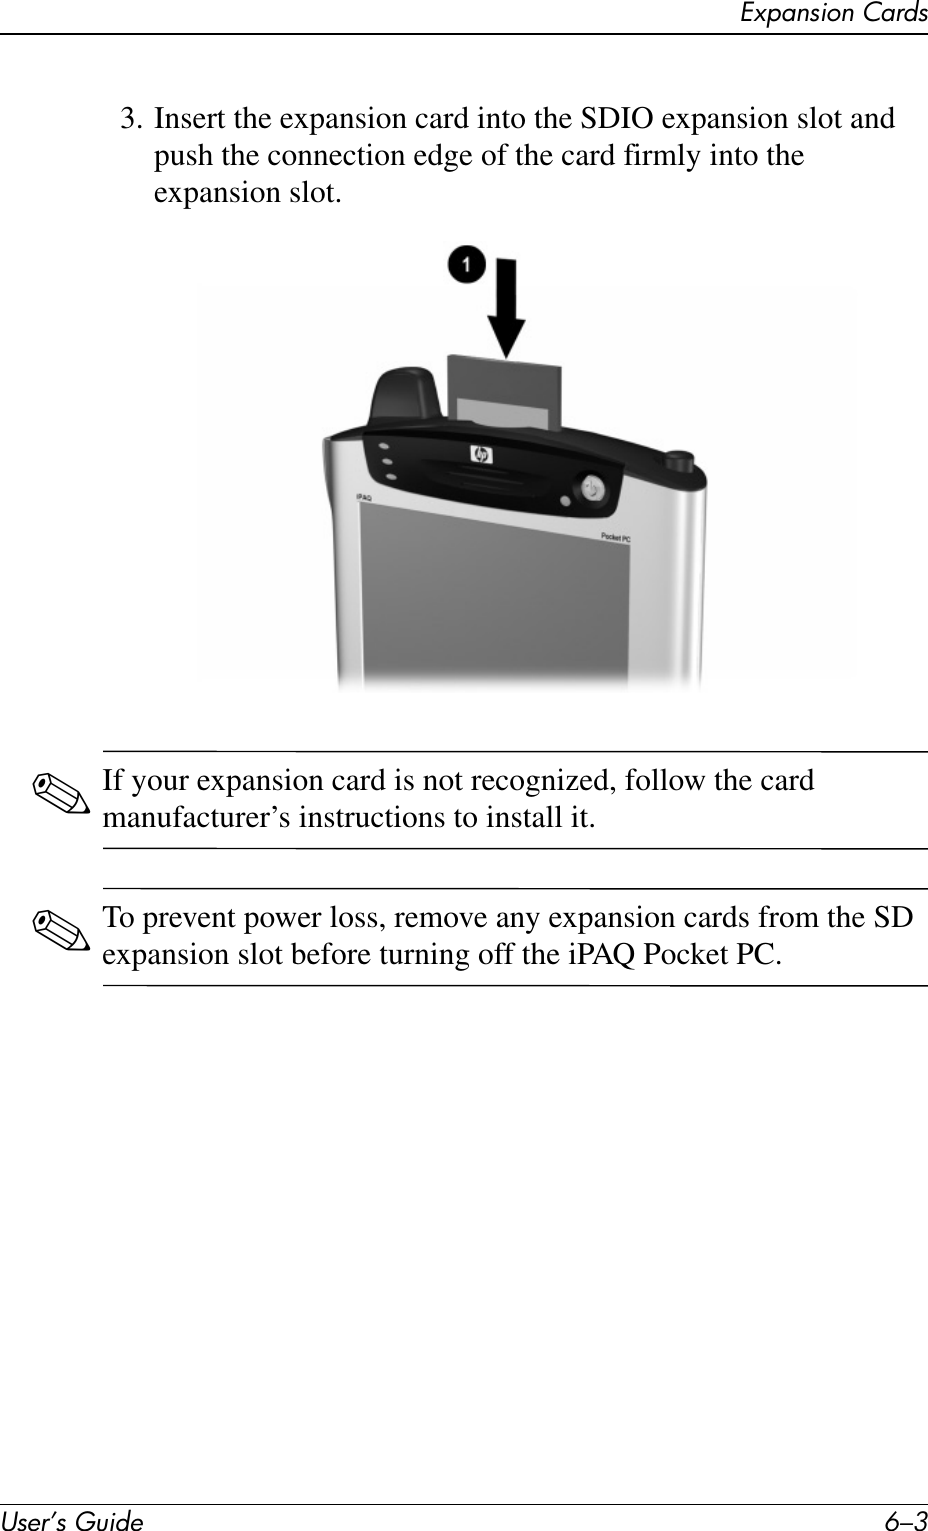 Expansion CardsUser’s Guide 6–33. Insert the expansion card into the SDIO expansion slot and push the connection edge of the card firmly into the expansion slot.✎If your expansion card is not recognized, follow the card manufacturer’s instructions to install it.✎To prevent power loss, remove any expansion cards from the SD expansion slot before turning off the iPAQ Pocket PC.